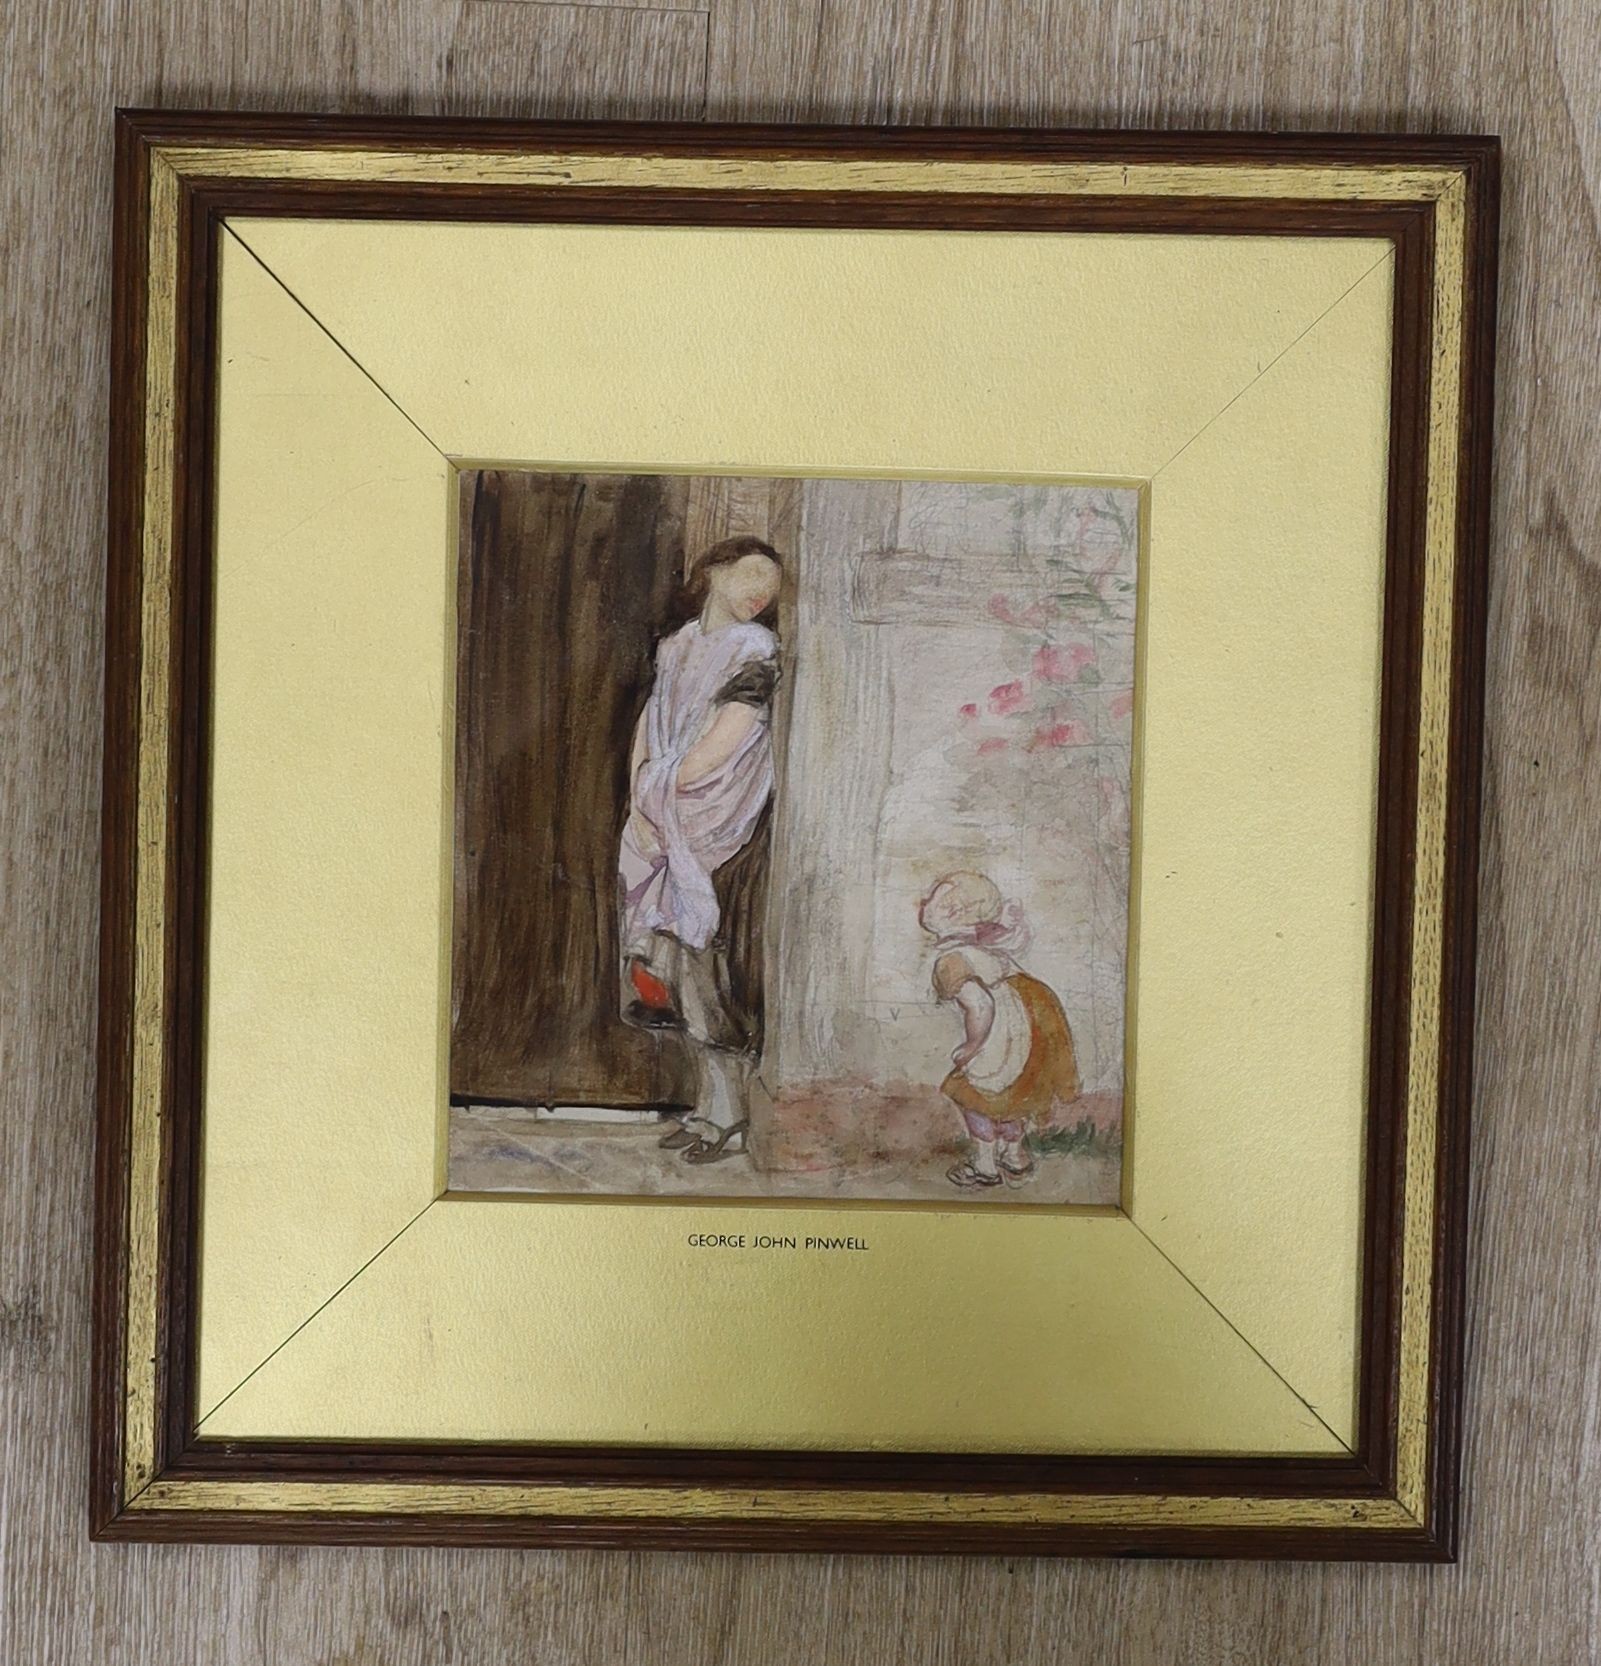 George John Pinwell, R.W.S. (1842-1875) - pencil and watercolour, Sketch of a mother and child beside a doorway, 18 x 17cm